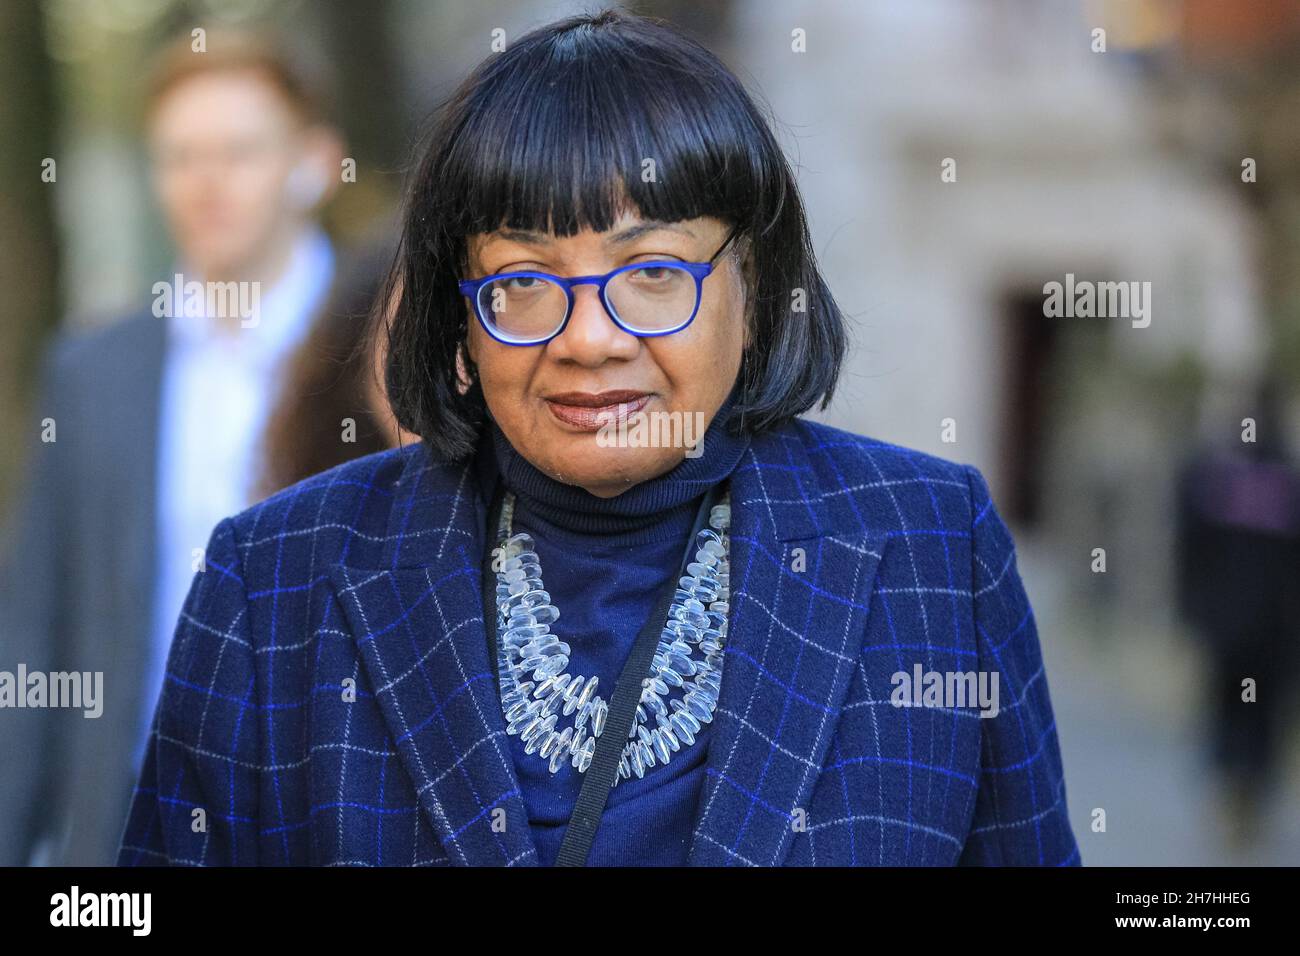 Westminster, London, UK. 23rd Nov, 2021. Diane Abbott, Labour MP for Hackney North and Stoke Newington, walks in Westminster today. Credit: Imageplotter/Alamy Live News Stock Photo